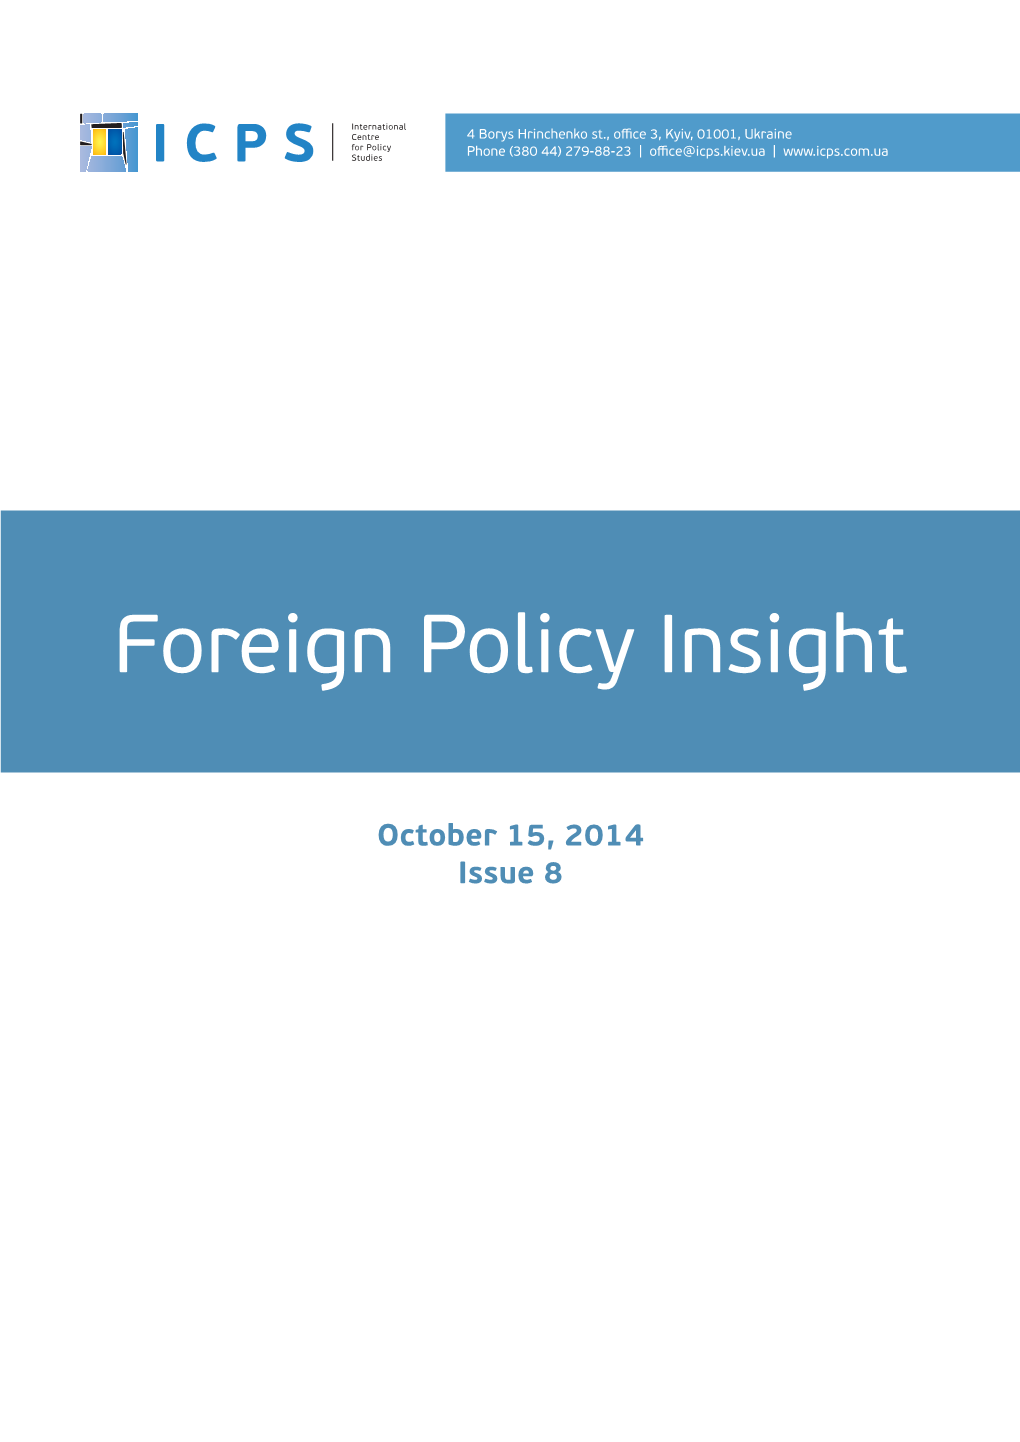 Foreign Policy Insight 8